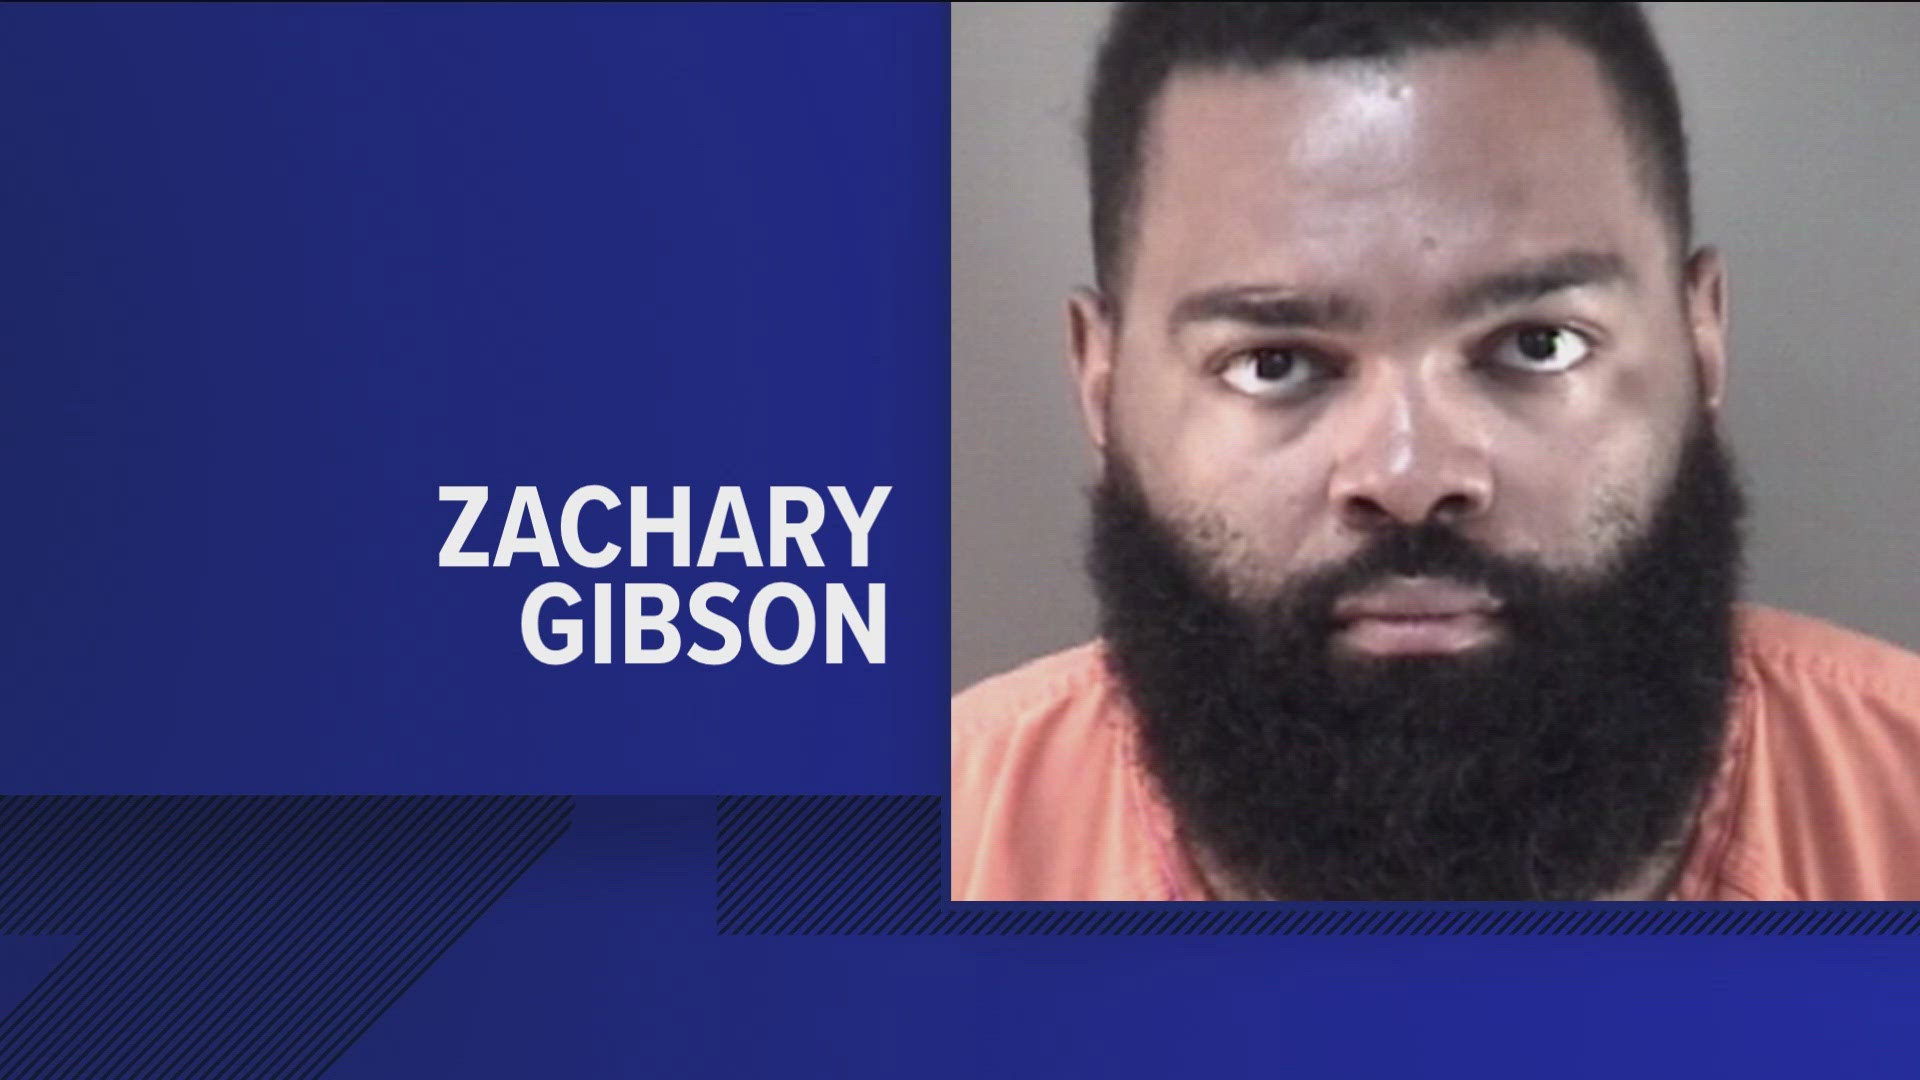 Zachary Gibson was found guilty of 19 charges, 15 of which are sex offenses involving minors, according to the Wood County Prosecutor's Office.